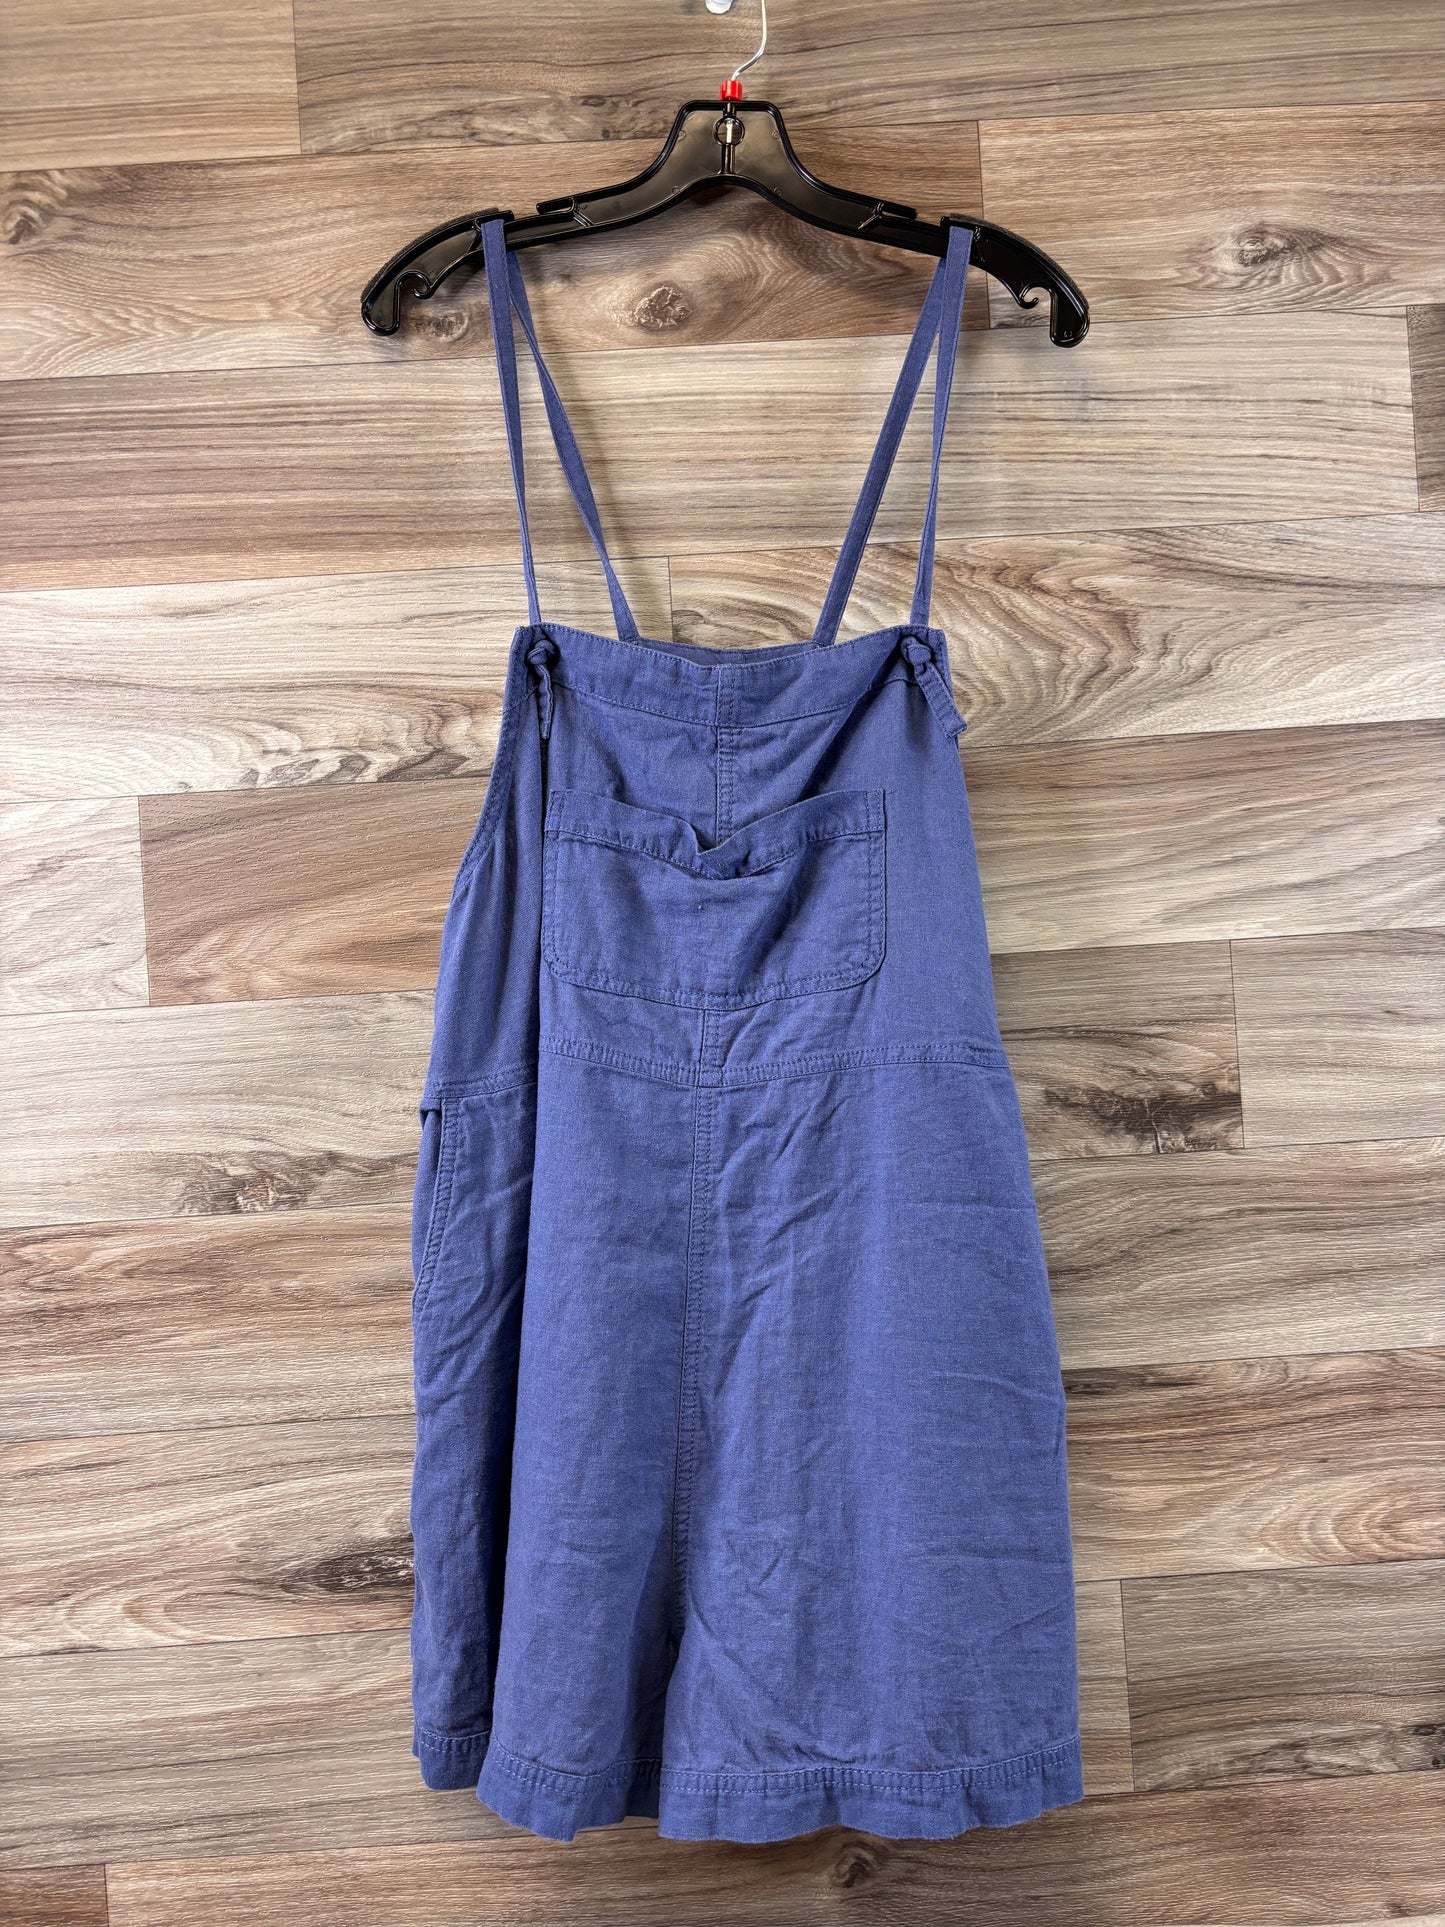 Blue Overalls Old Navy, Size Xl